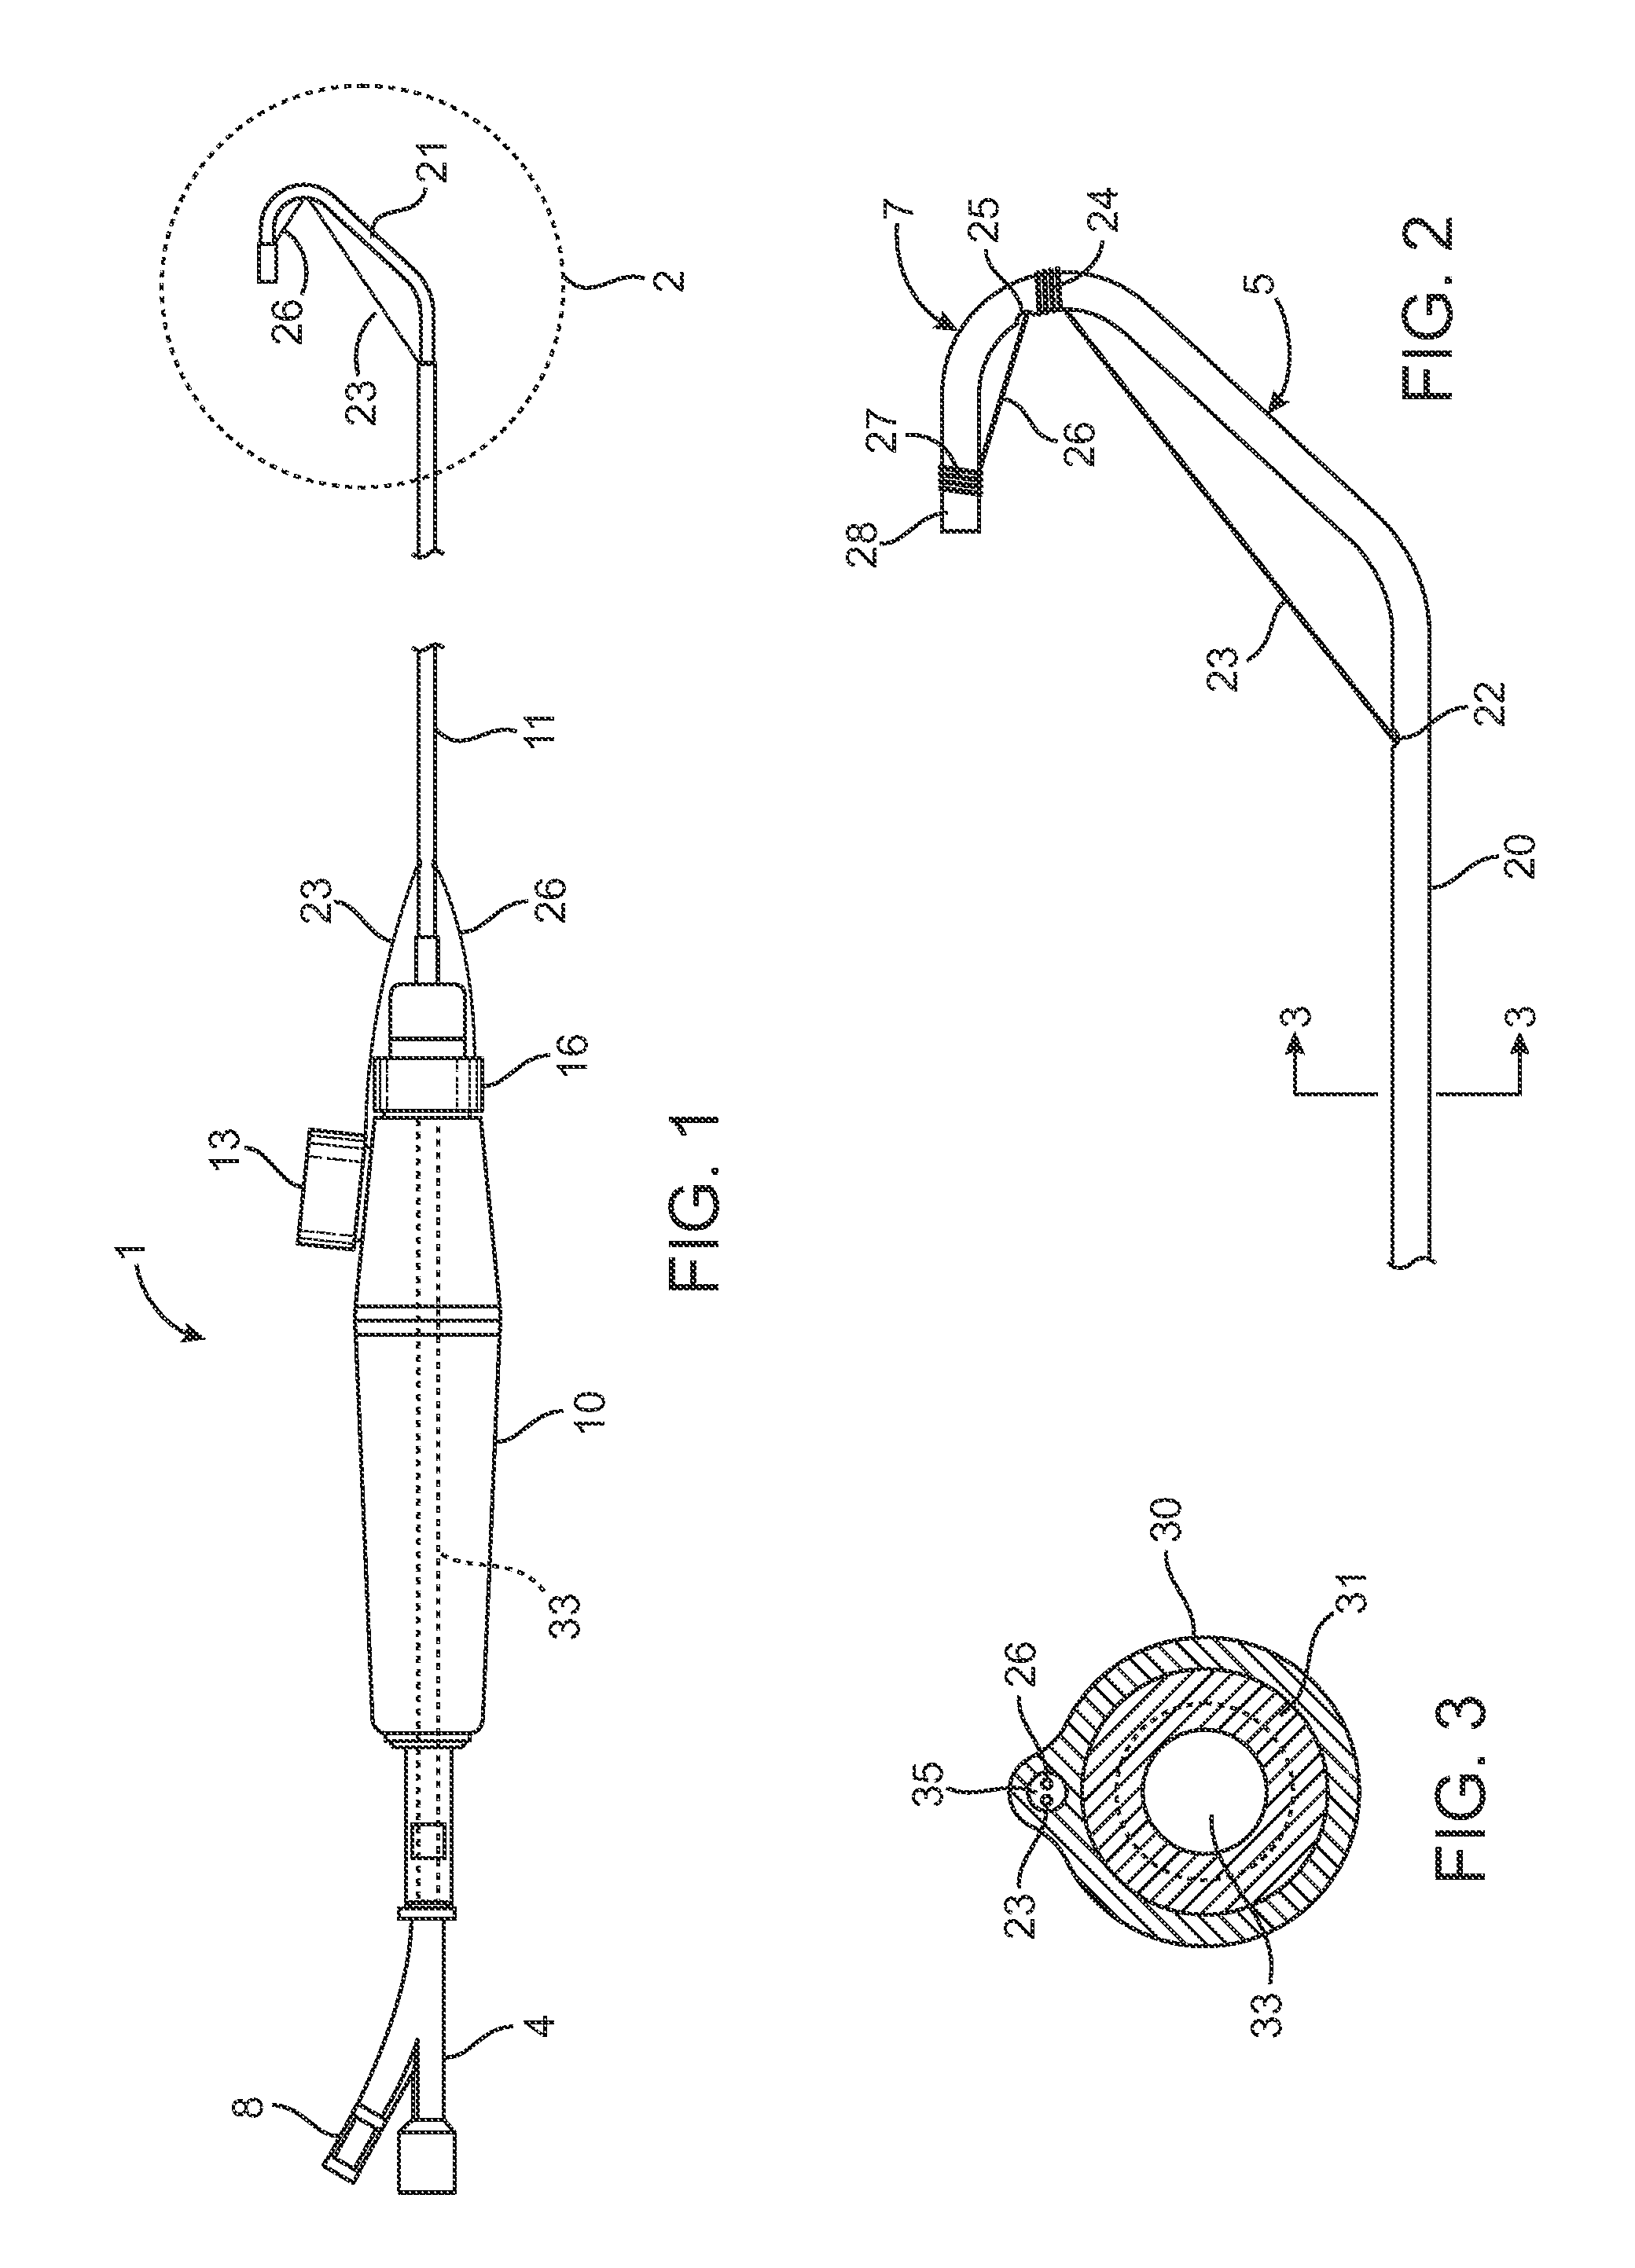 Catheter Having a Selectively Formable Distal Section